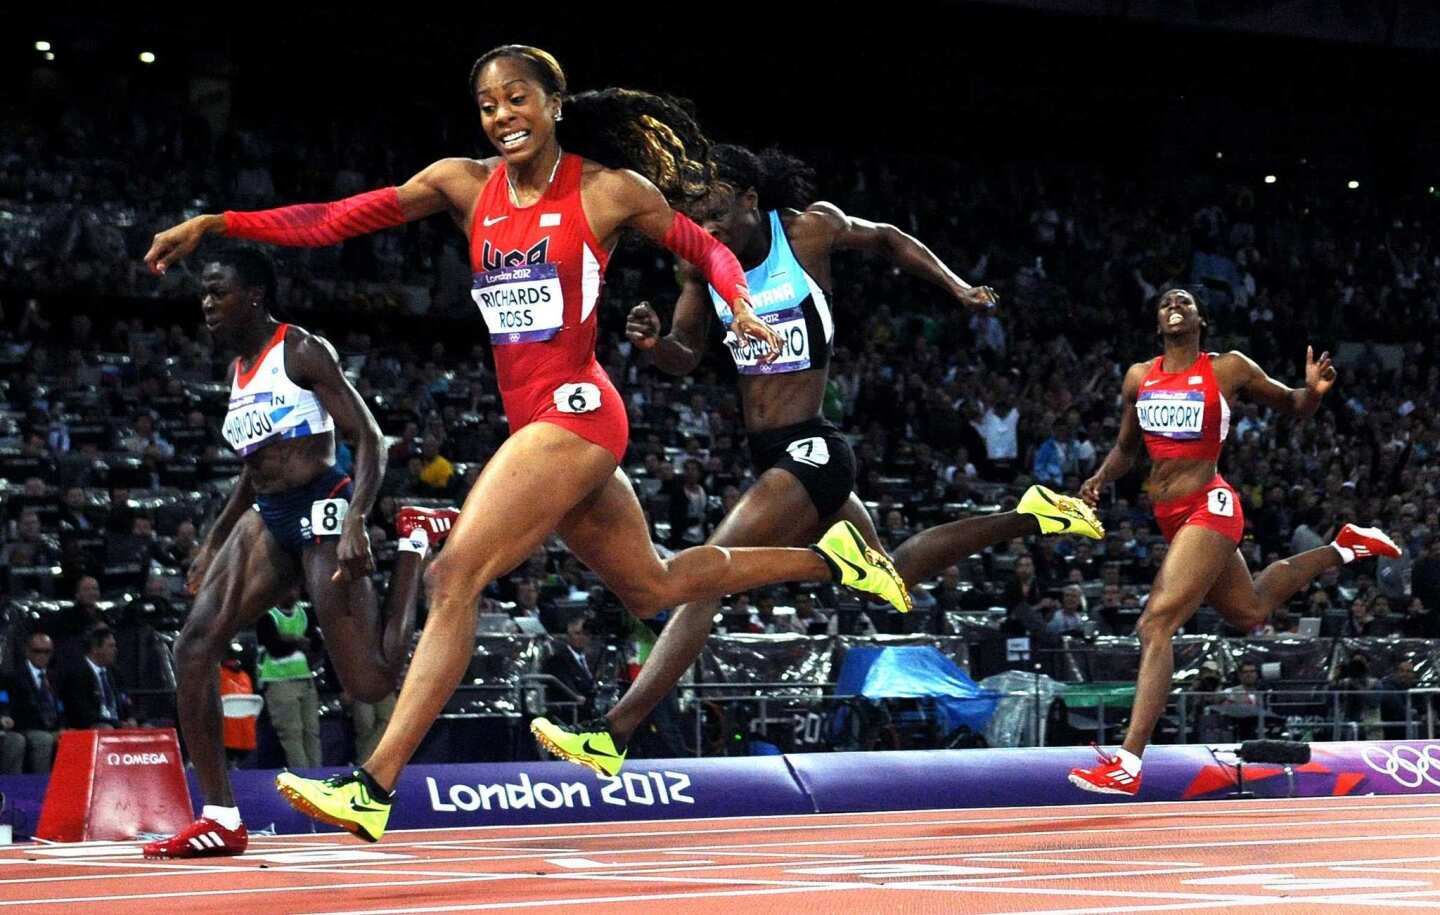 Team USA's Sanya Richards-Ross crosses the finish line to win the gold in the 400 meters at the 2012 London Olympics